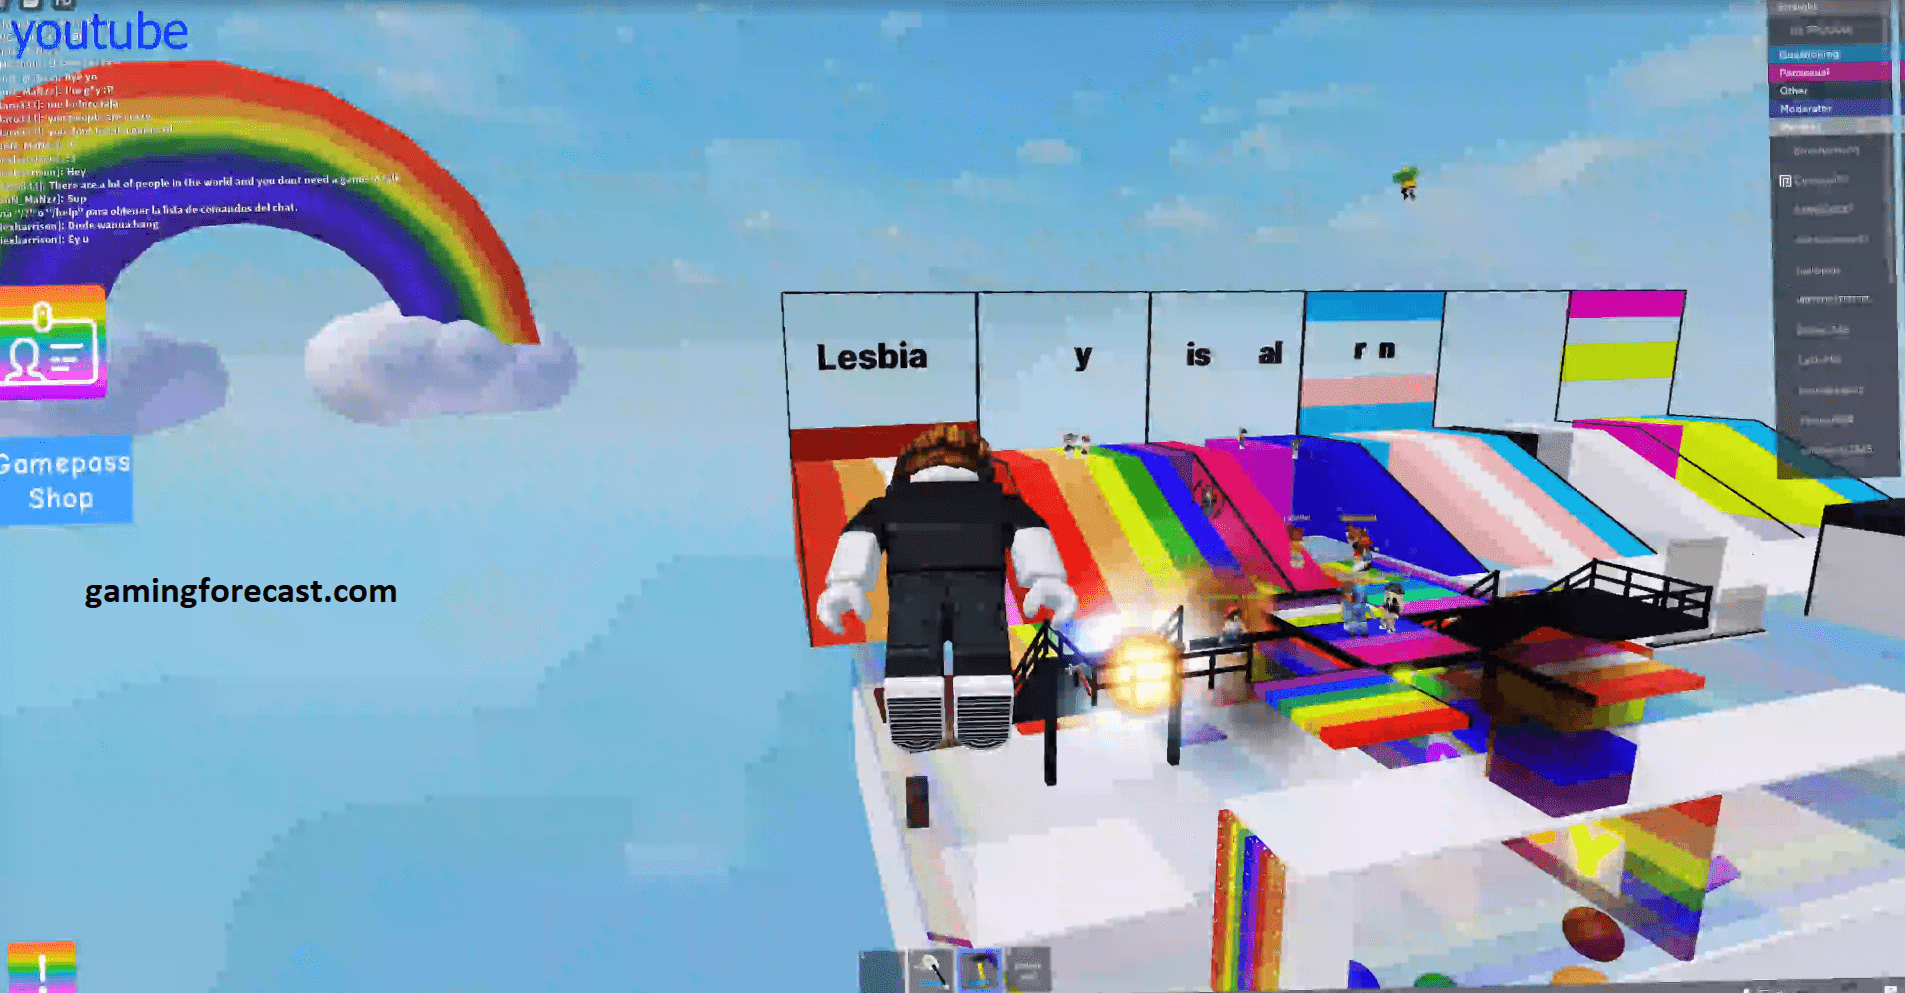 Roblox Hack Download Pc Destroy Lobby Fly Aimbot Scripts 2021 Gaming Forecast Download Free Online Game Hacks - how to check if someone in roblox is hacking